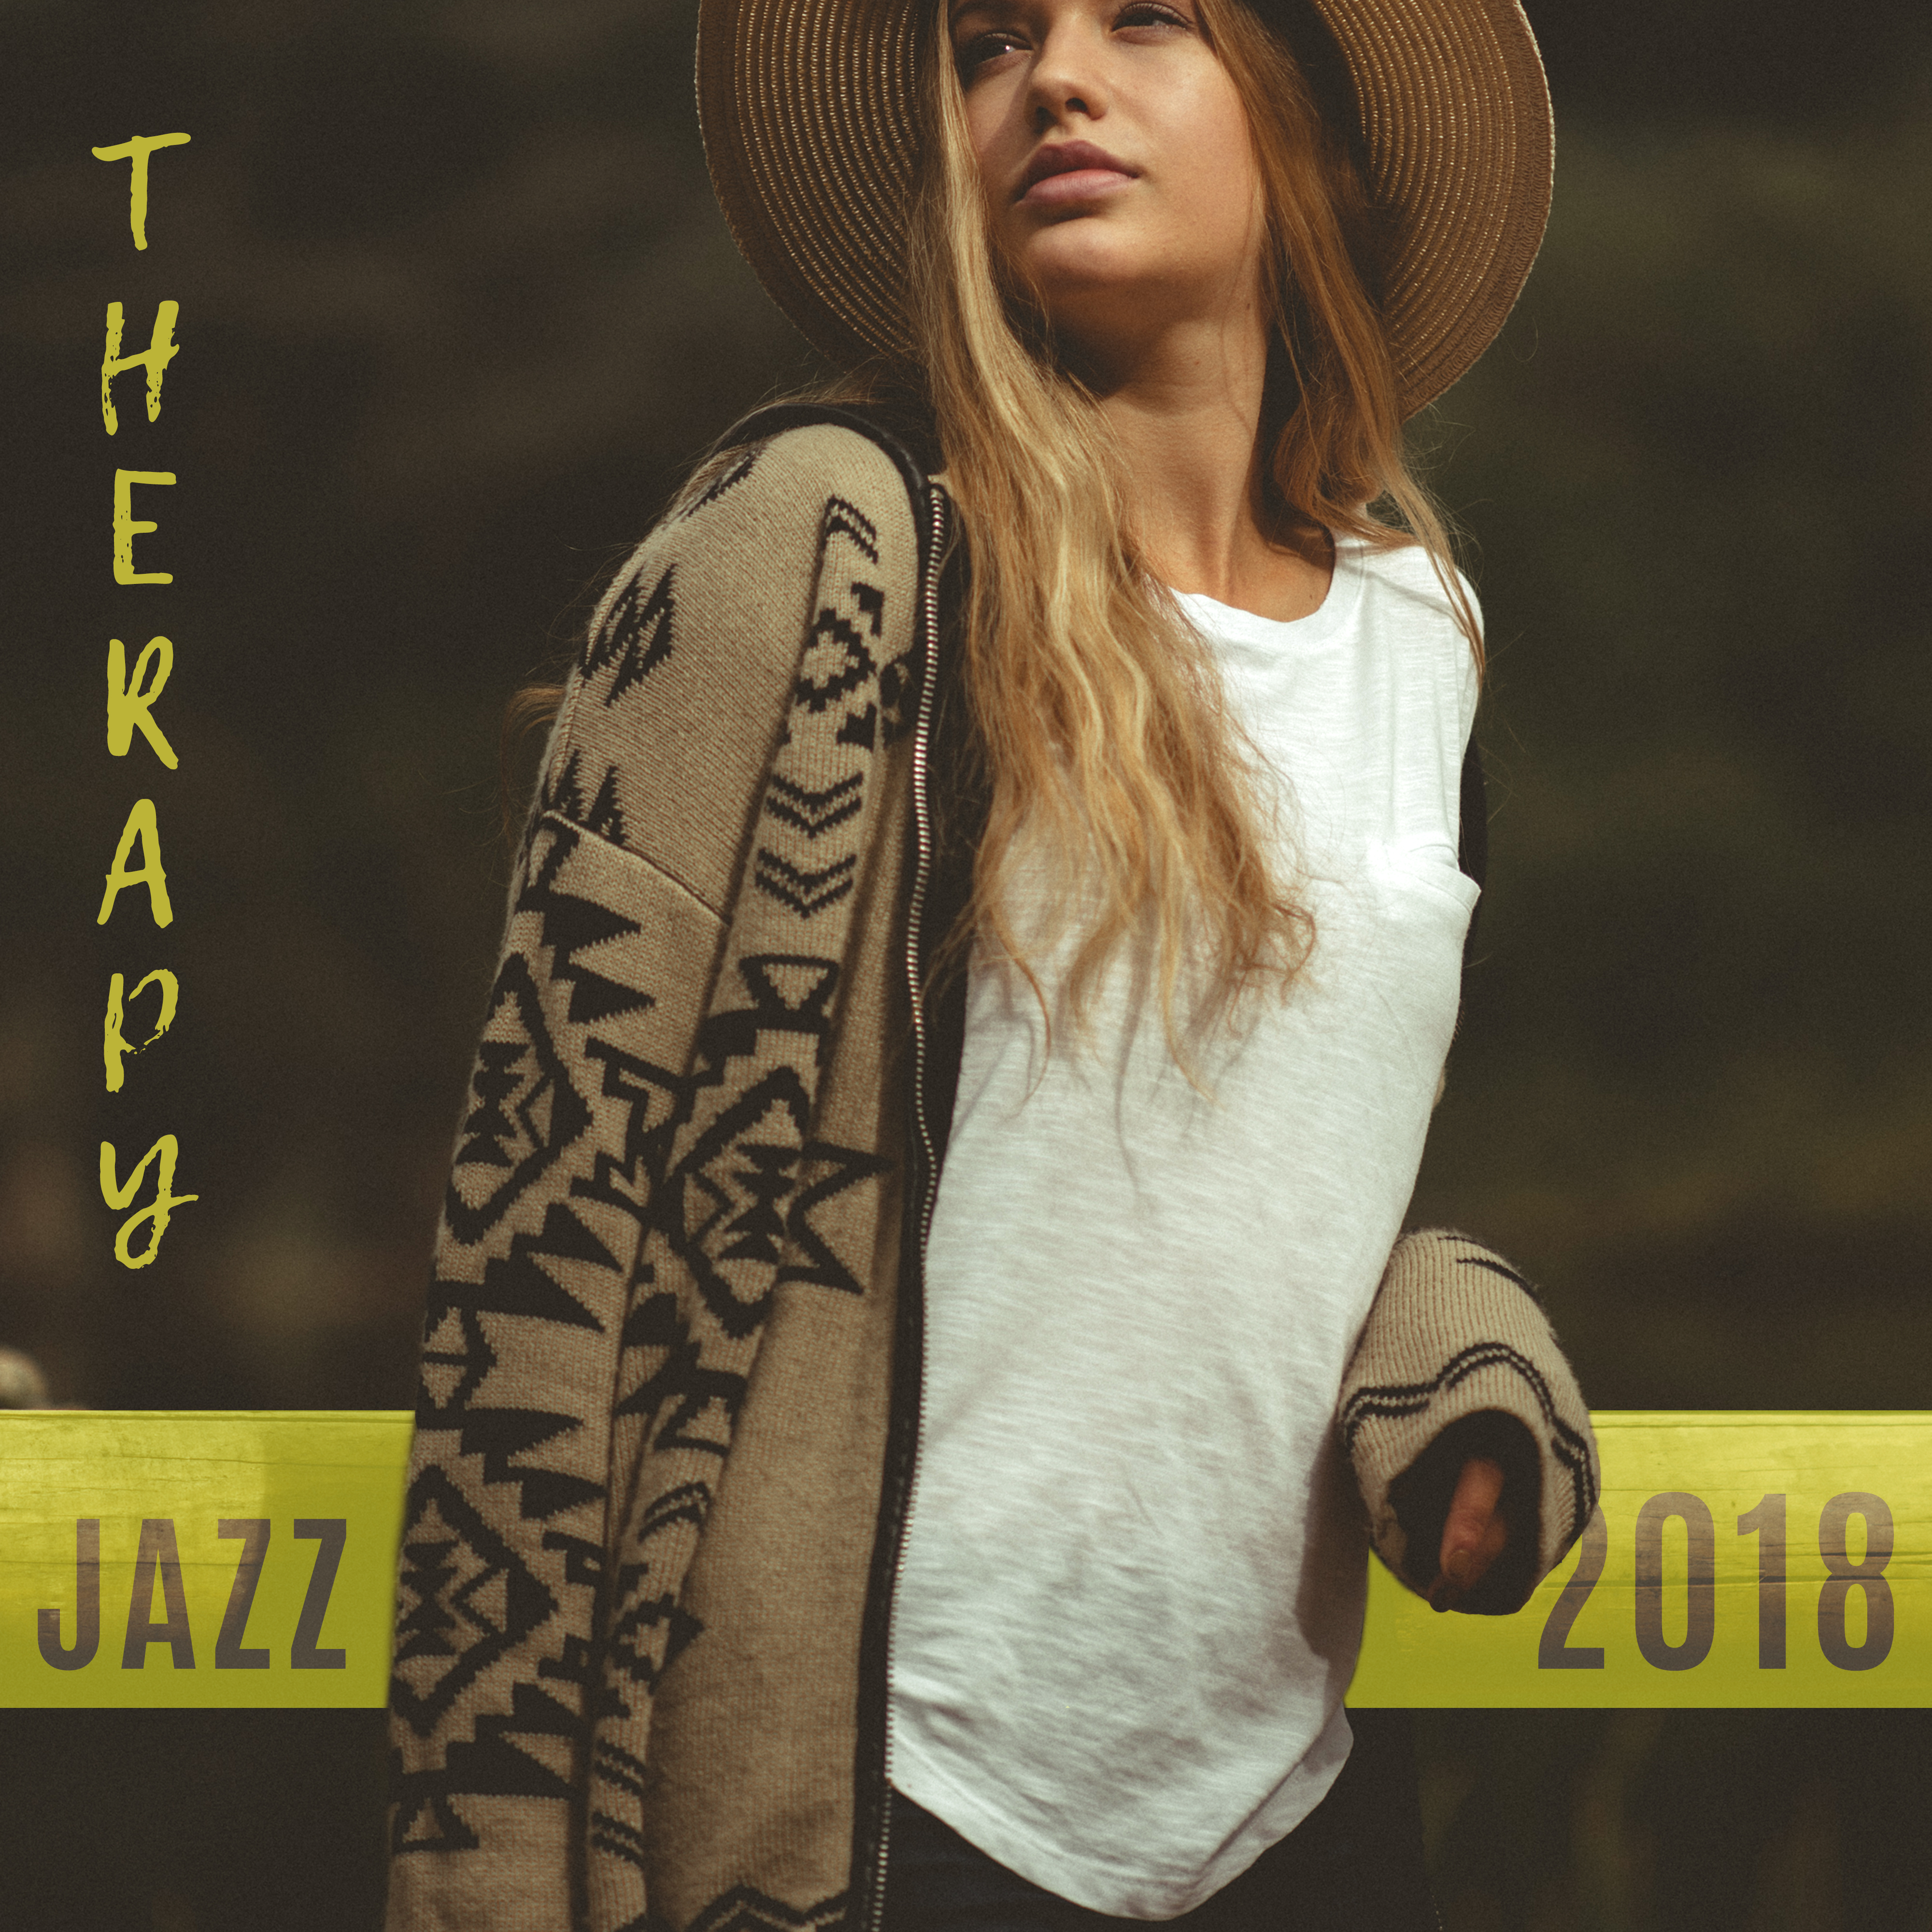 Therapy Jazz 2018